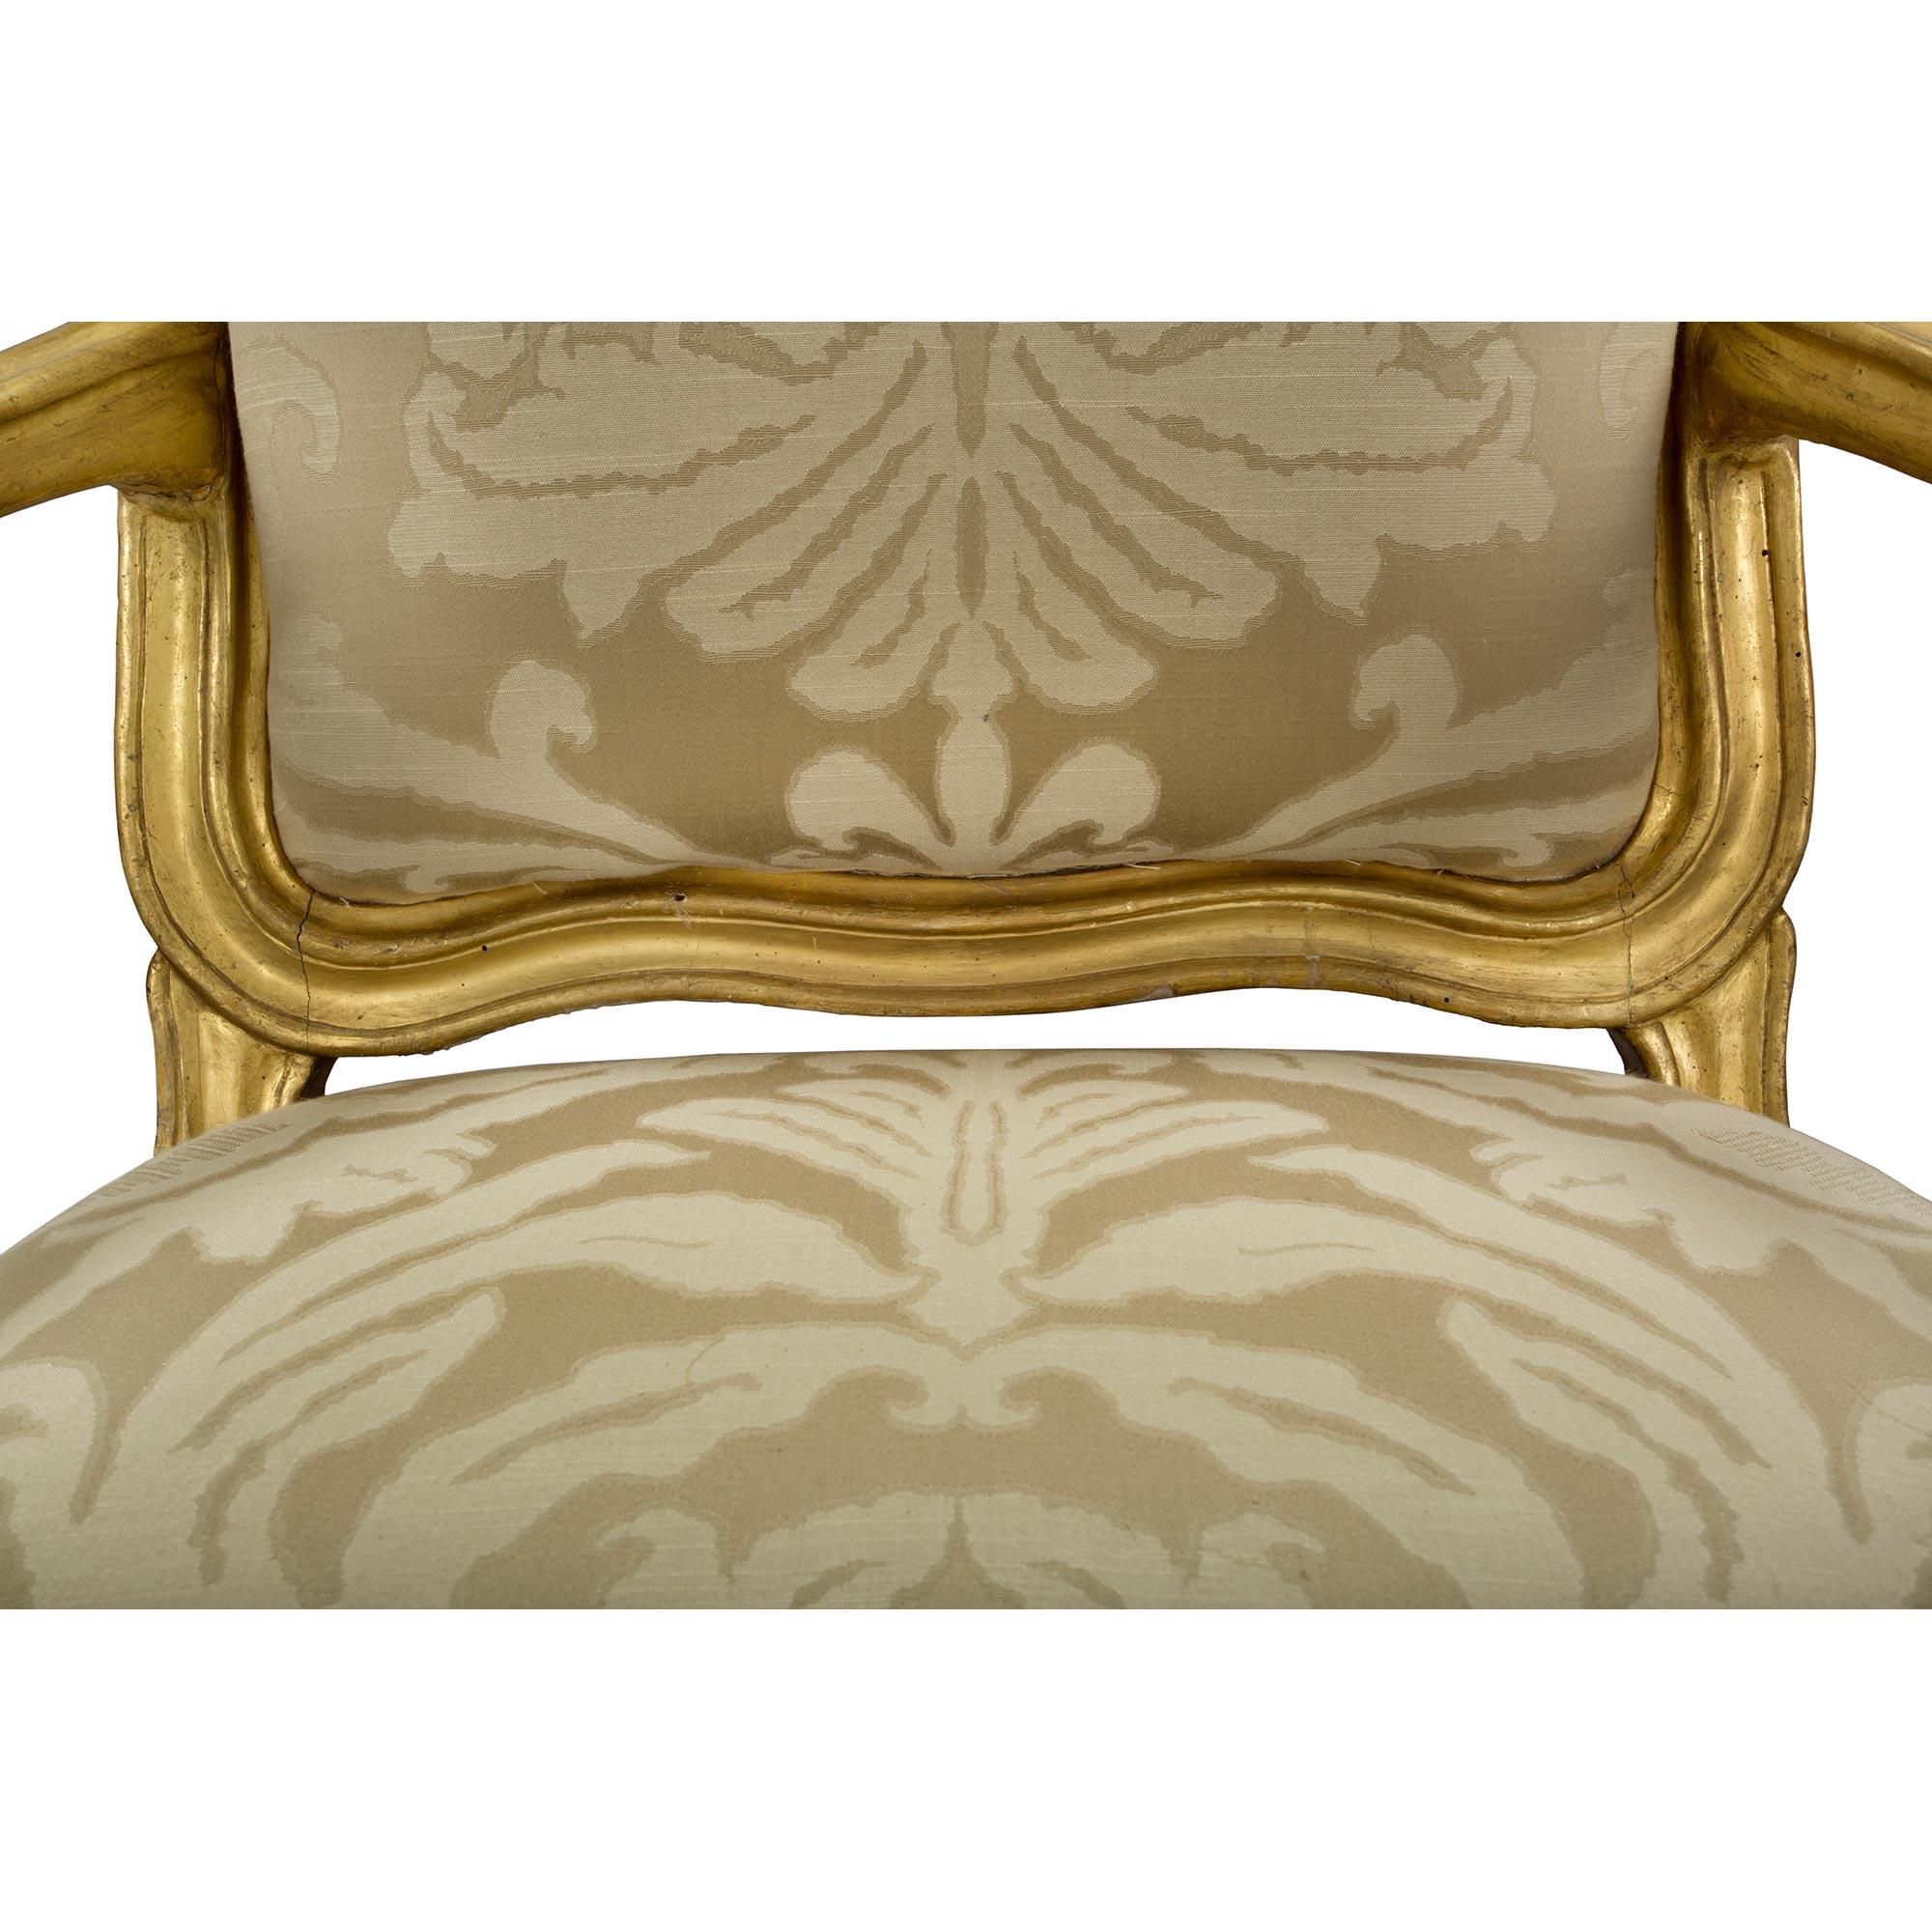 Set of Four Italian 18th Century Transitional Period Giltwood Armchairs For Sale 6